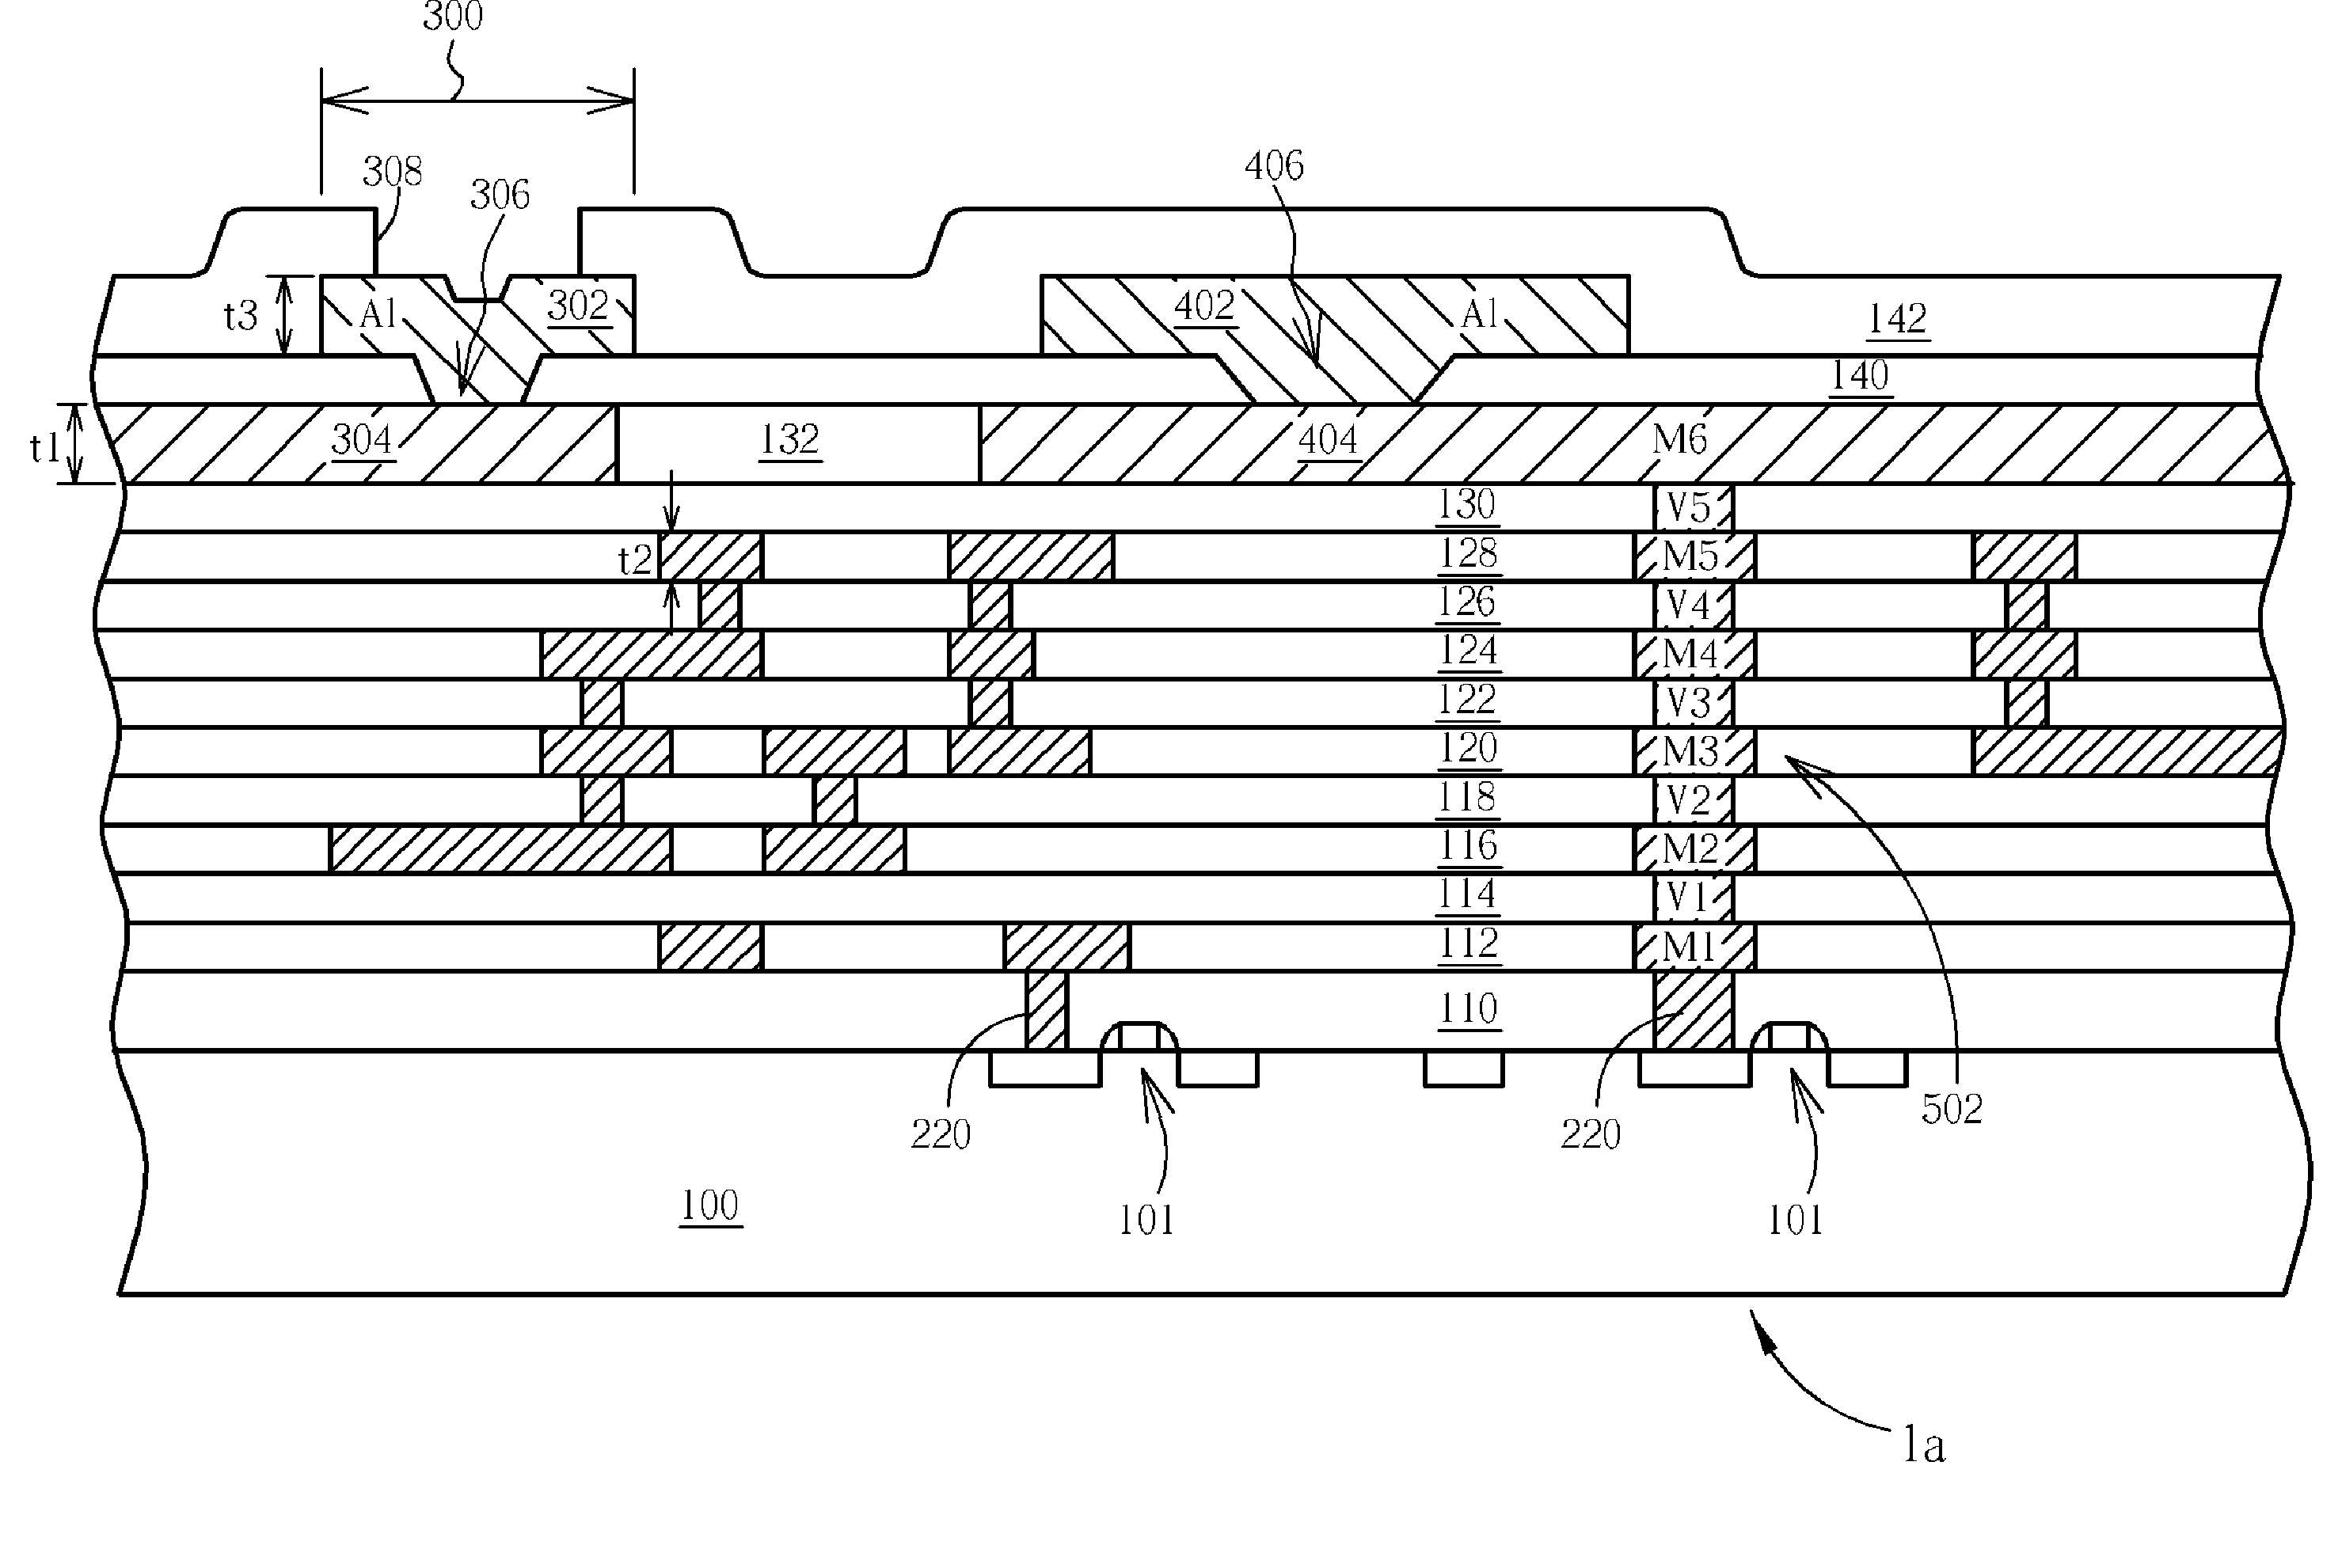 Power and ground routing of integrated circuit devices with improved ir drop and chip performance